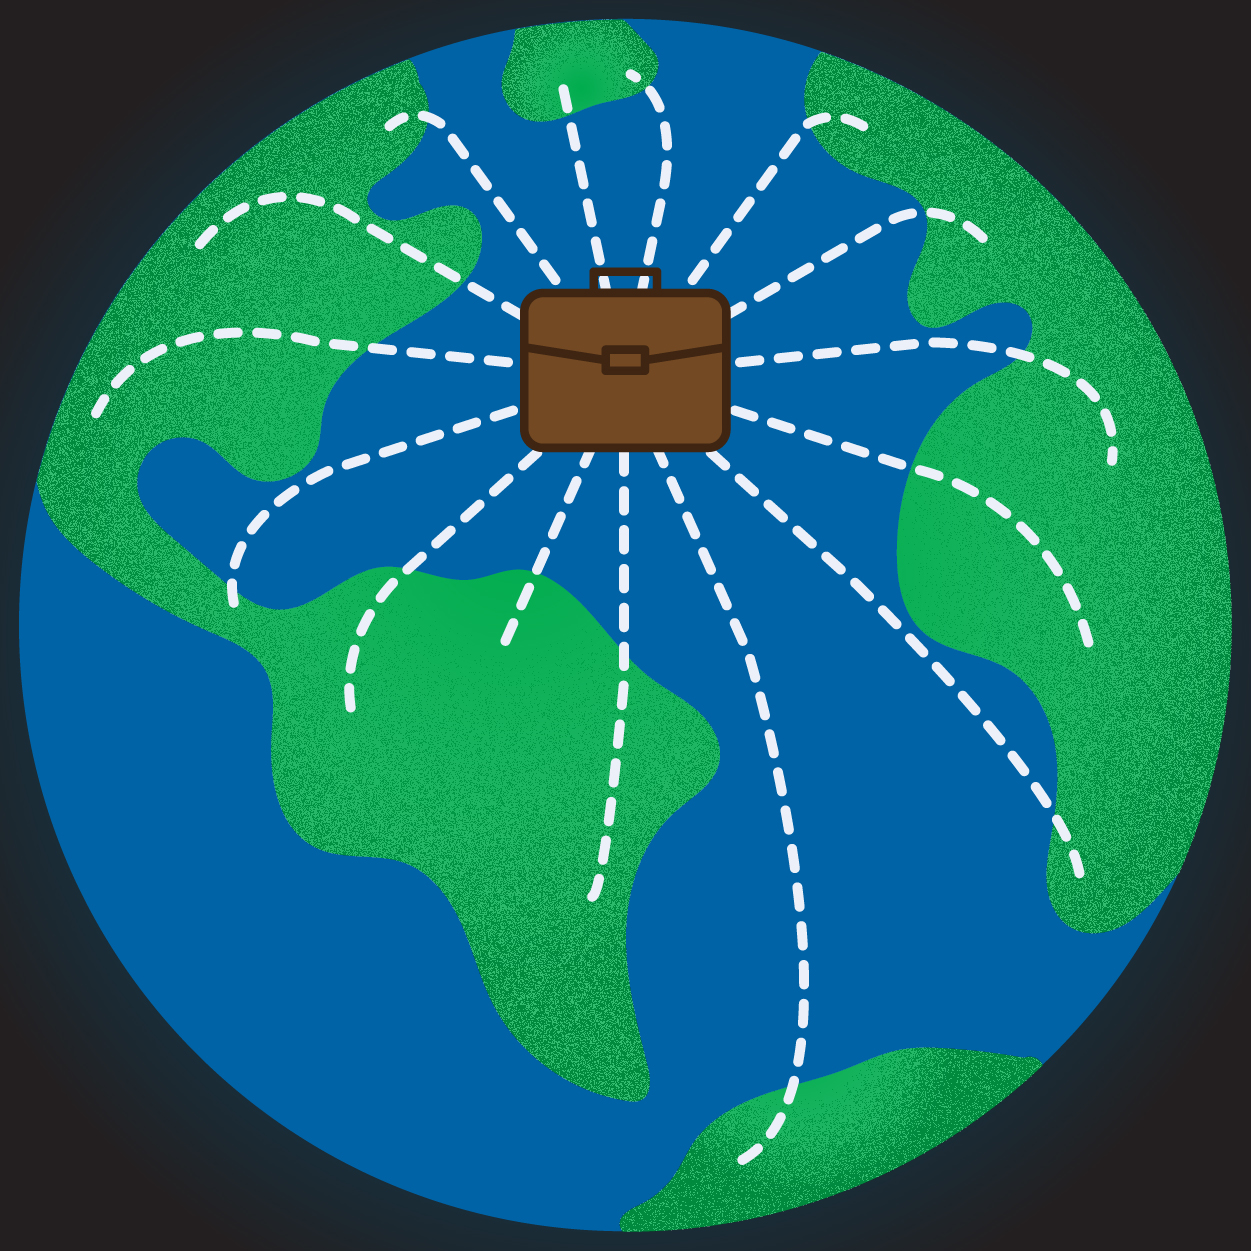 graphic of a globe and a suitcase